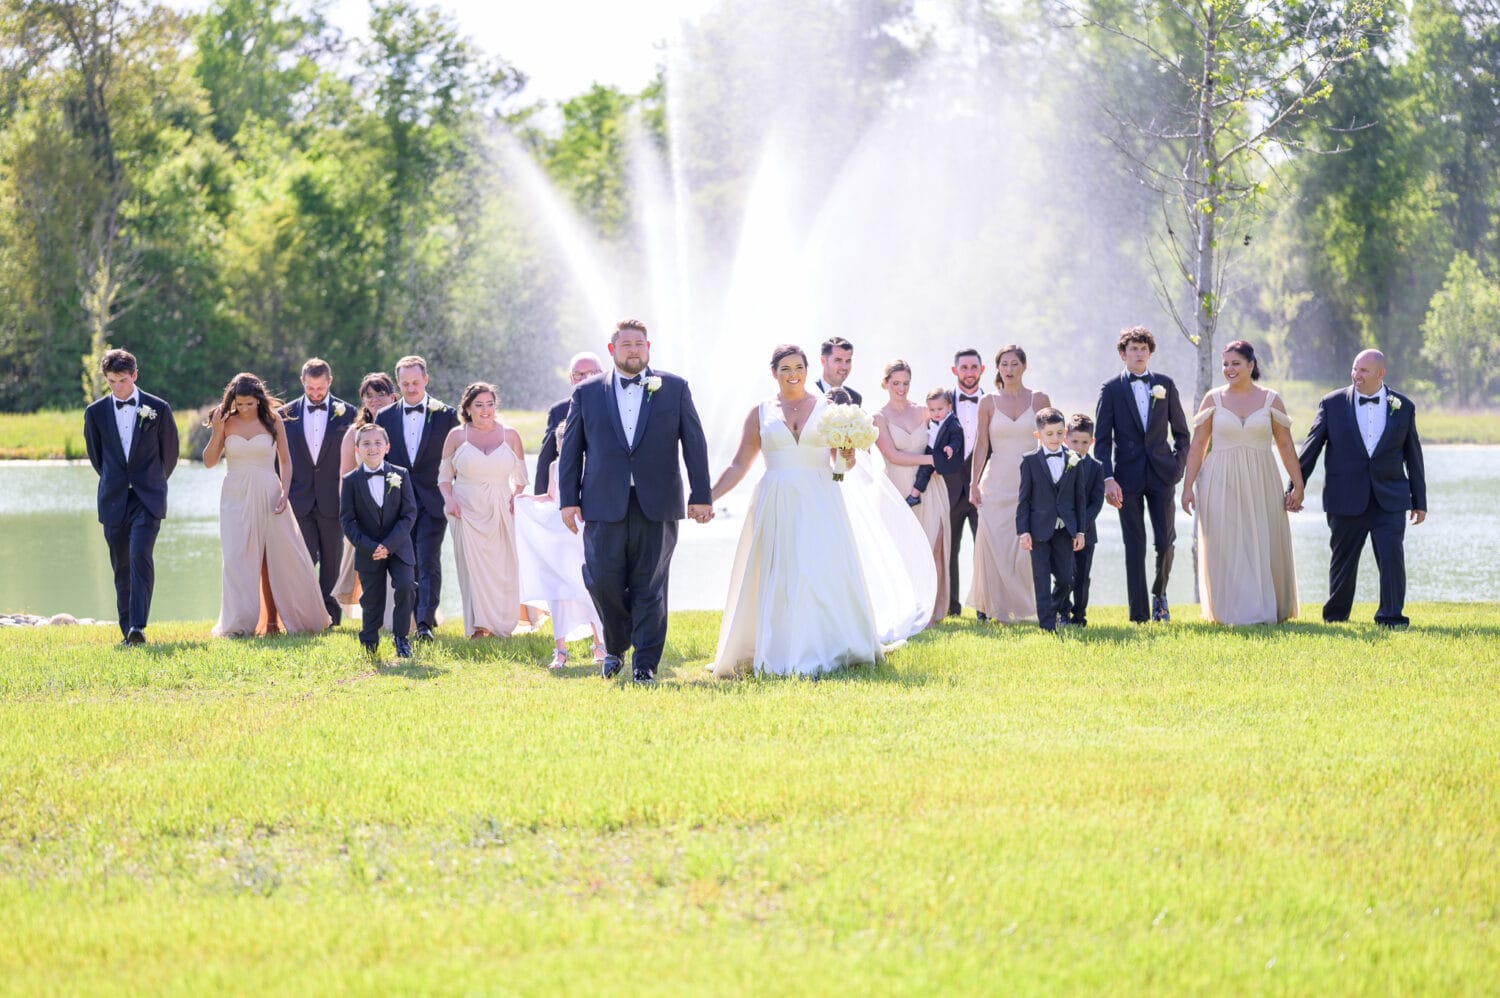 Bridal party walking from the lake - The Venue at White Oaks Farm